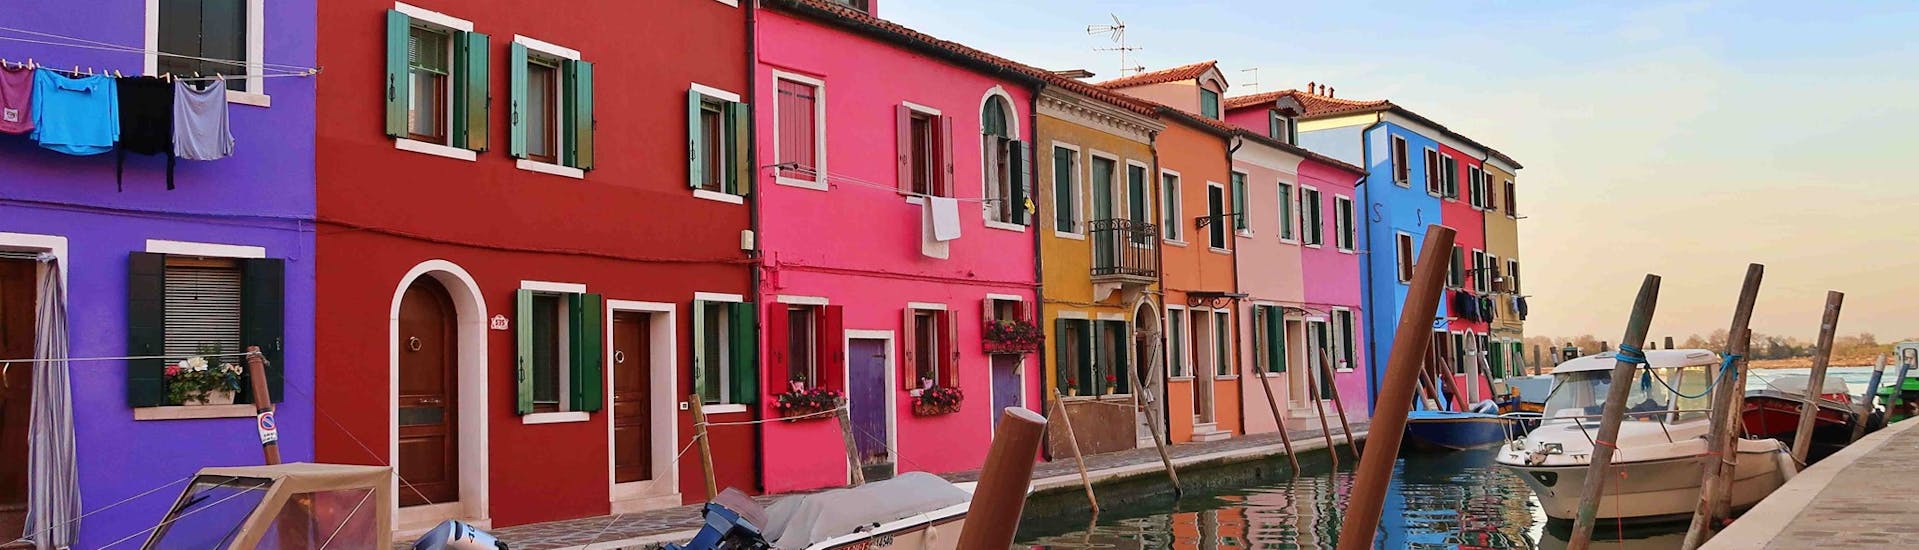 A photo of the colourful houses taken in Burano during the Boat Trip from Punta Sabbioni to Murano, Burano & Torcello with Il Doge di Venezia.